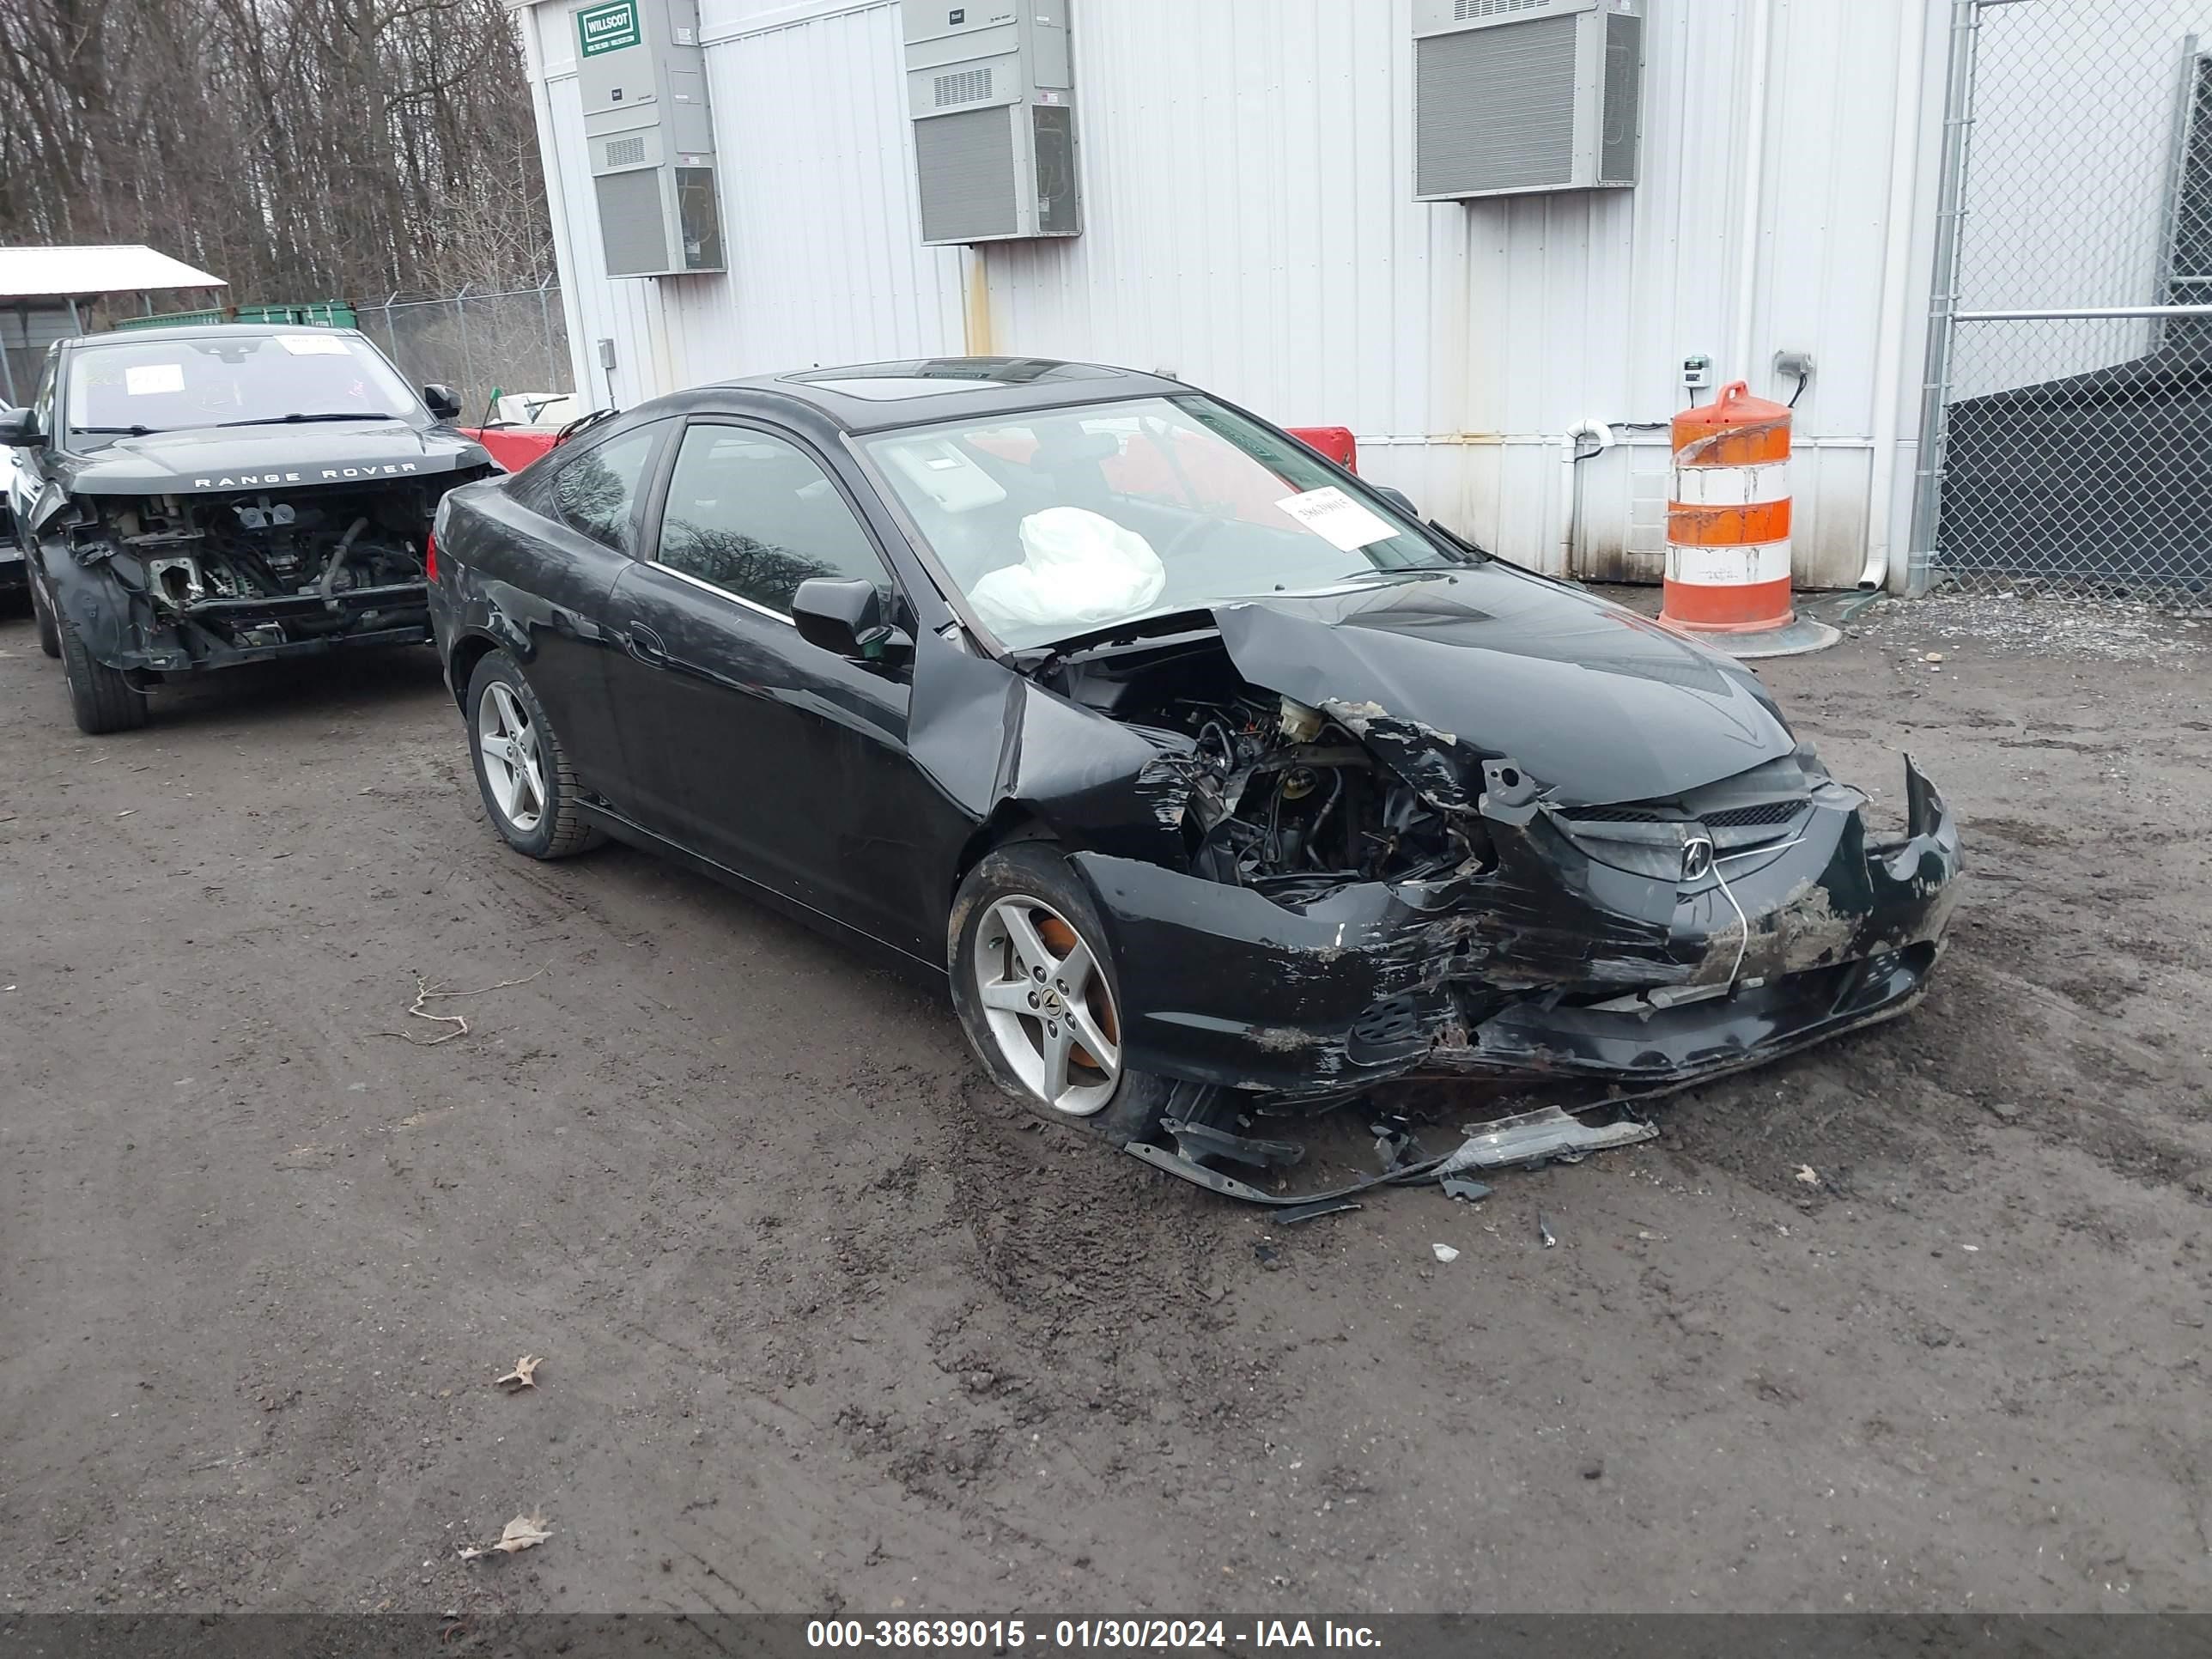 VIN: JH4DC53004S008156 - acura rsx